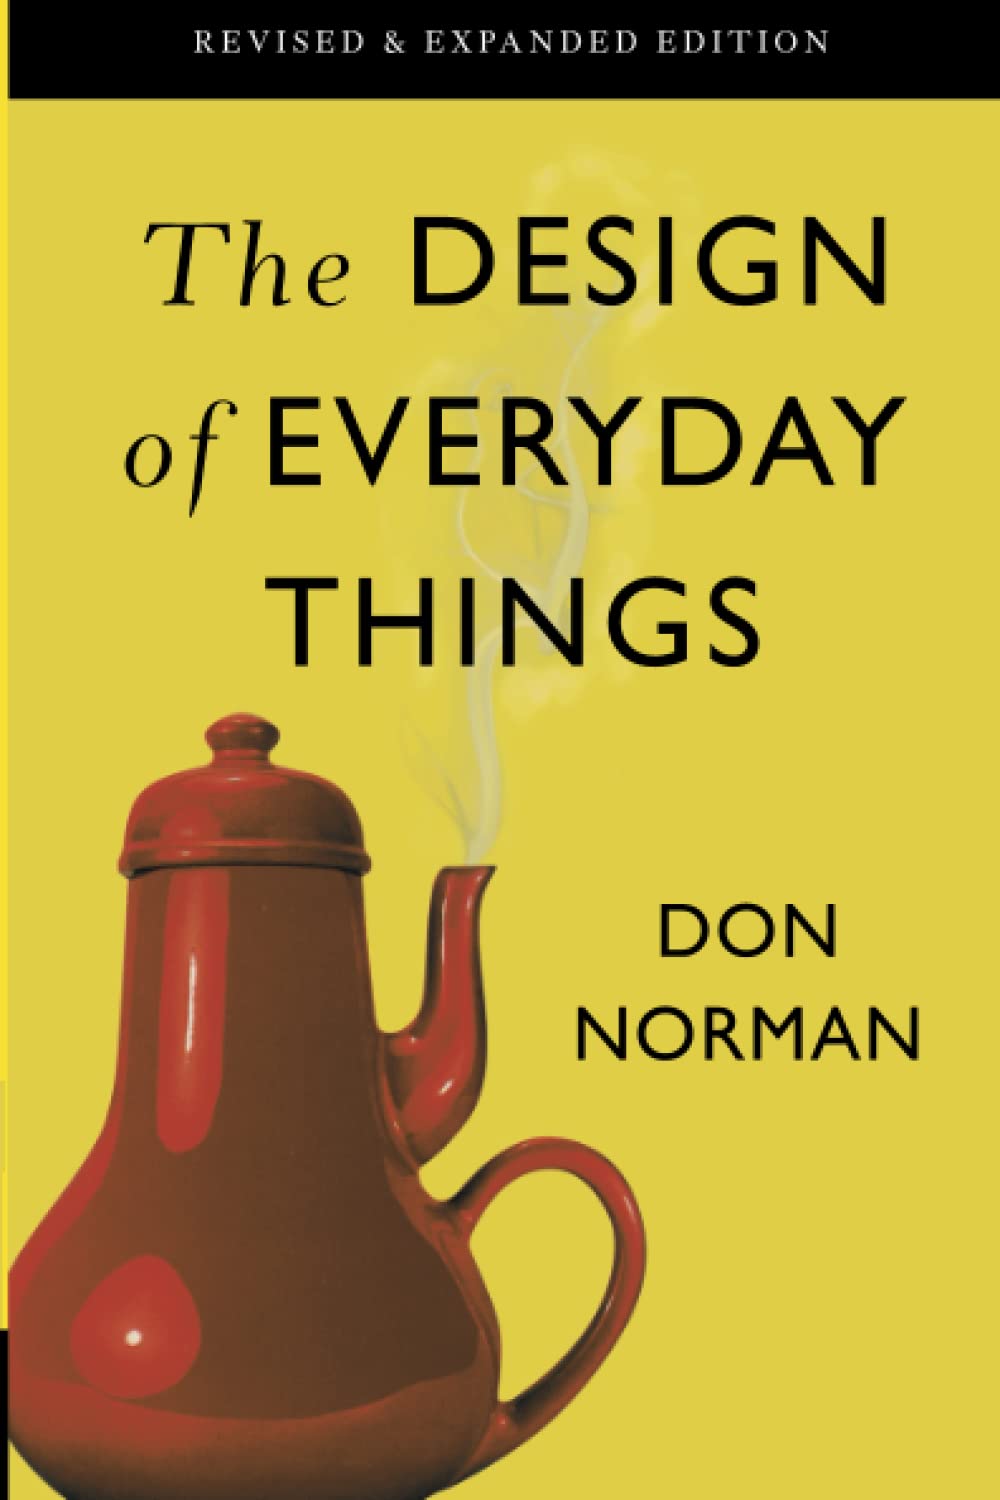 The Design of Everyday Things – Don Norman